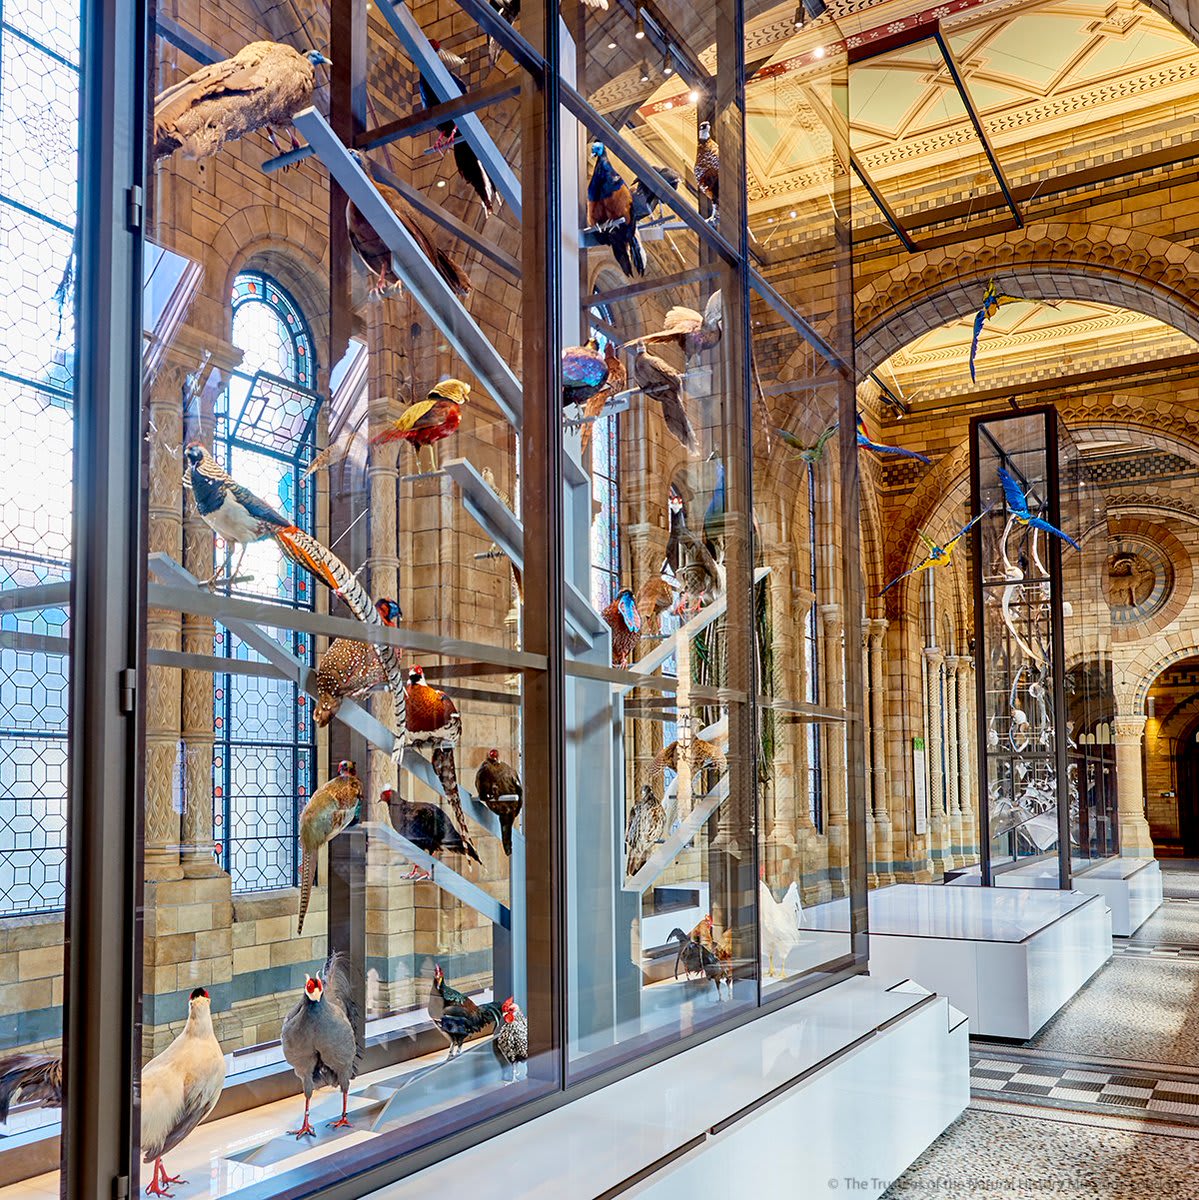 A midweek glimpse into our galleries, for anyone missing them as much as we are: up on Hintze Hall's balcony, you'll find two showcases displaying taxidermy birds - one for Procellariiformes (an order of more than 125 seabirds) and one for Phasianidae (the pheasant family).